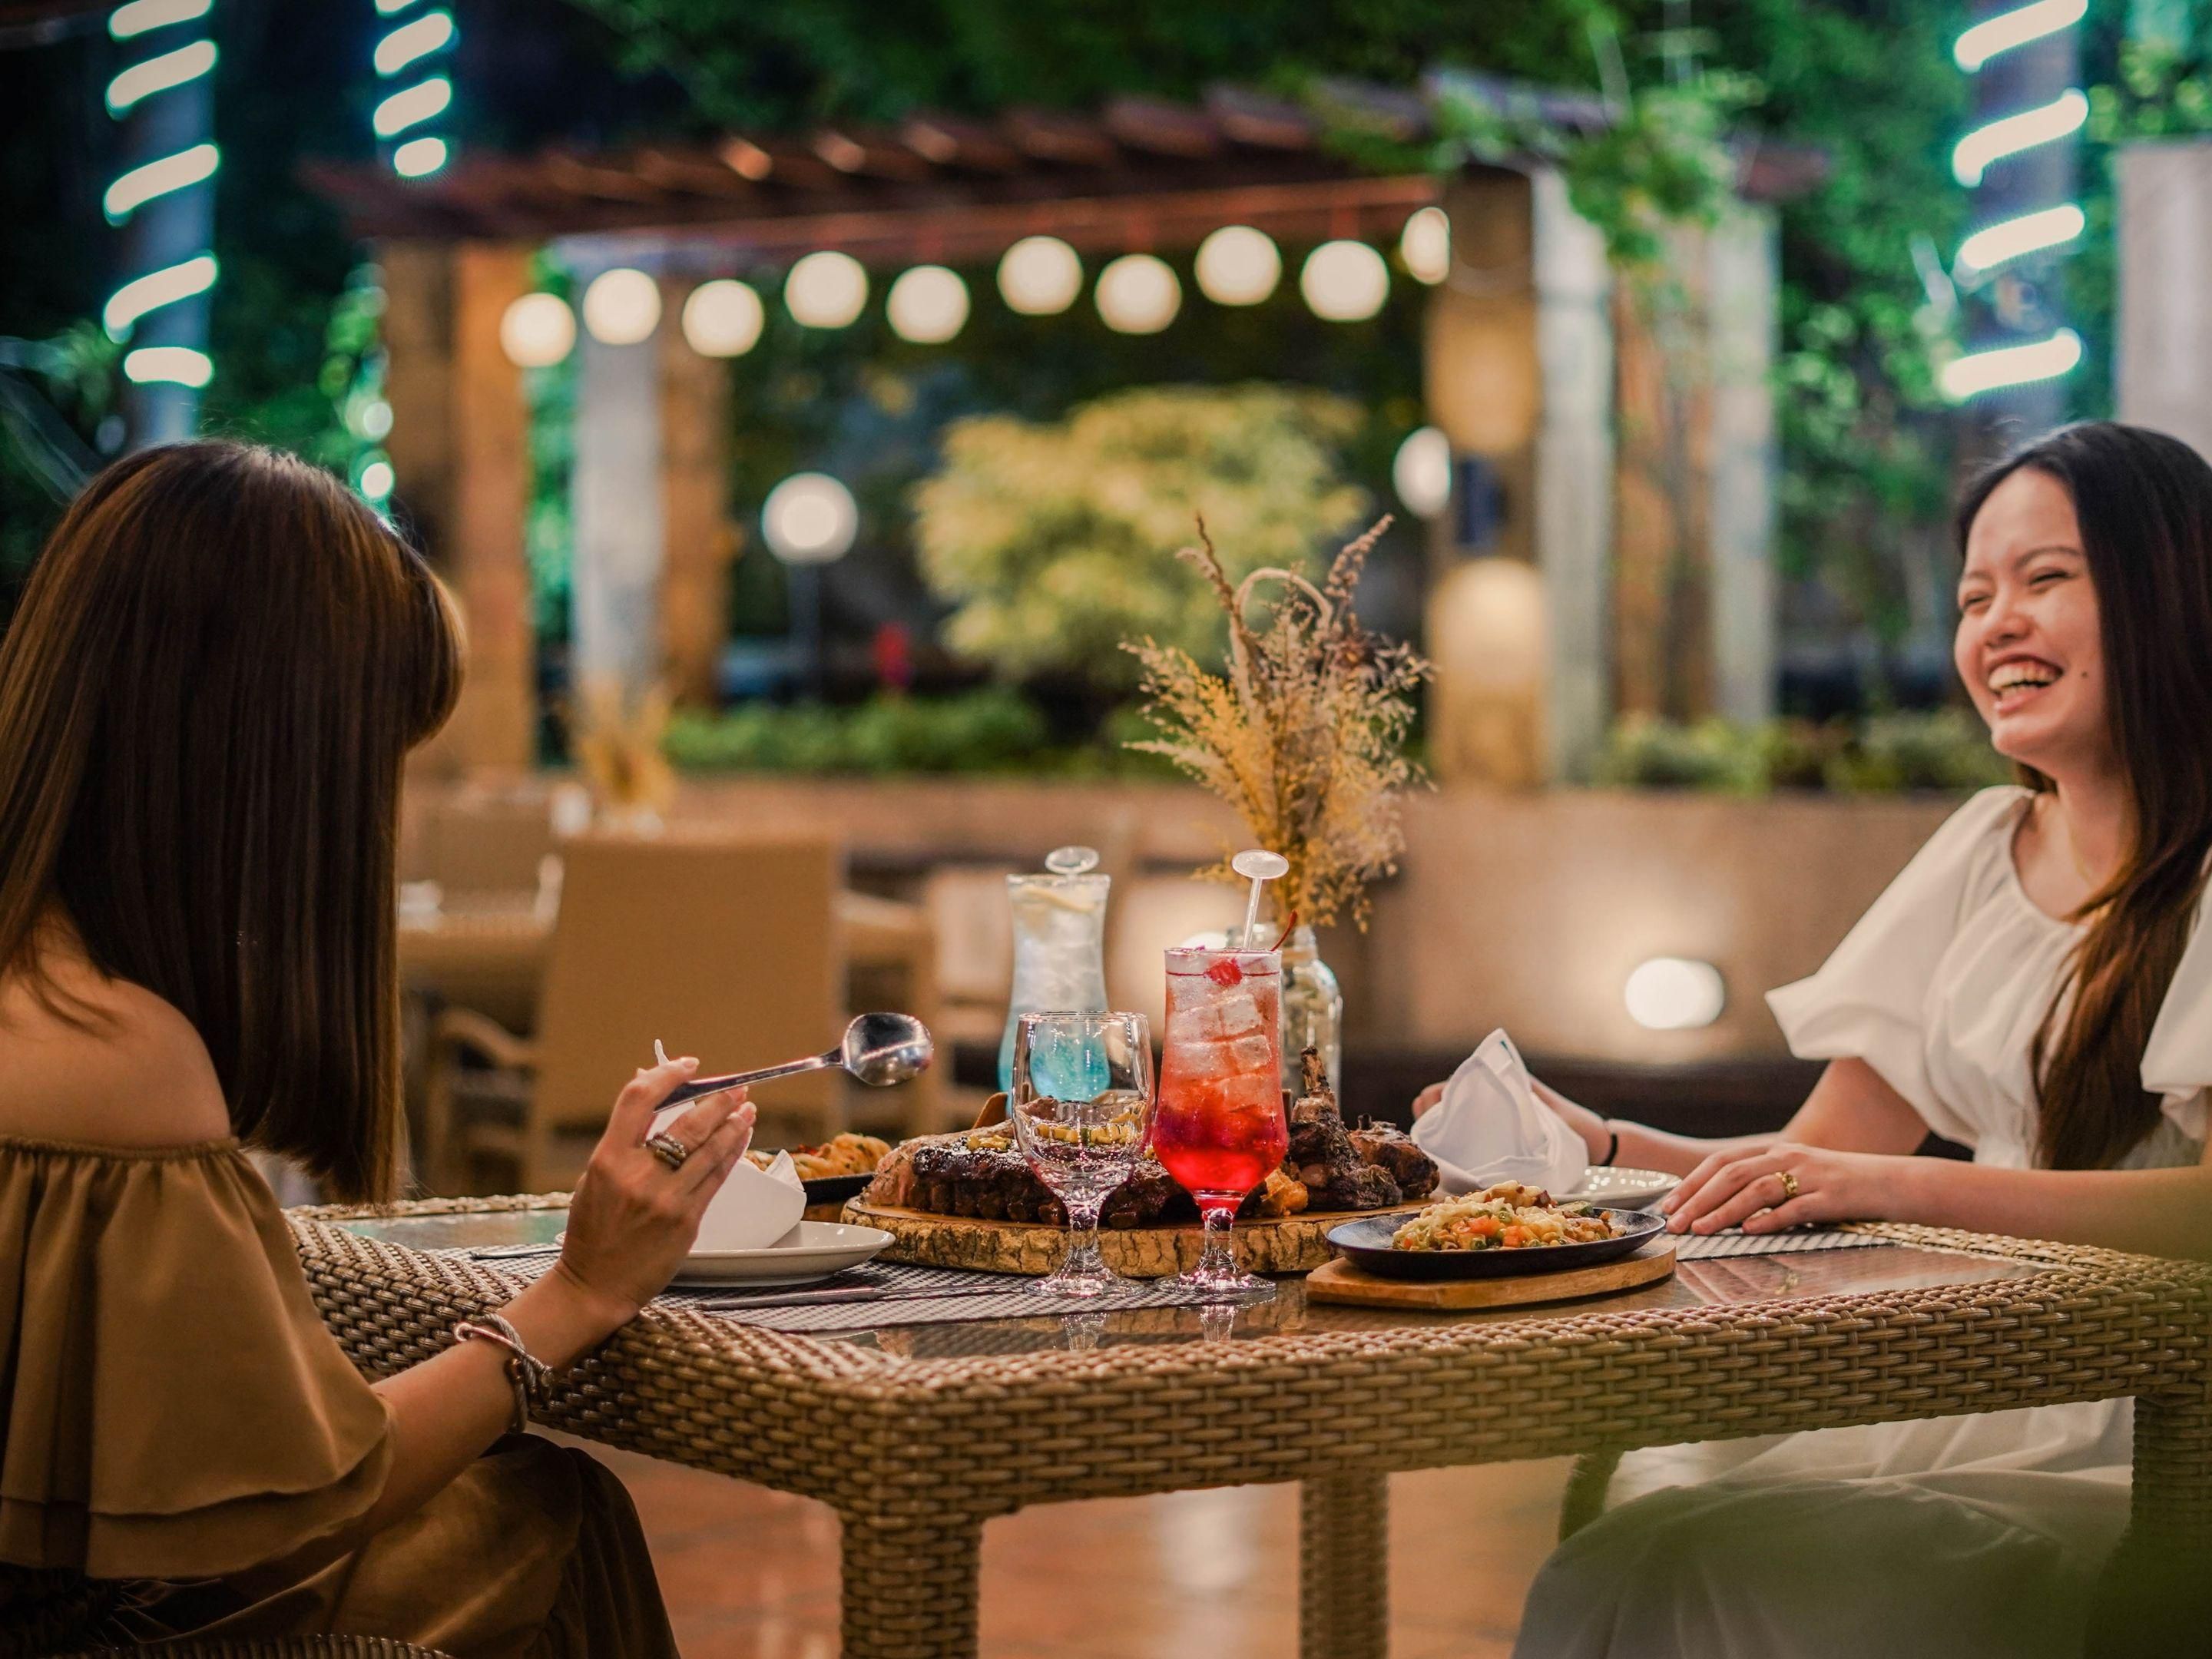 If you’re looking for a place to relax, enjoy a late afternoon or evening with a drink at The Courtyard by Seven Corners, our al fresco bar. Featuring a fine list of beverages, The Courtyard is open from Thursday to Saturday from 5PM to 11PM.

Call +63 2 8790 3100 to reserve.